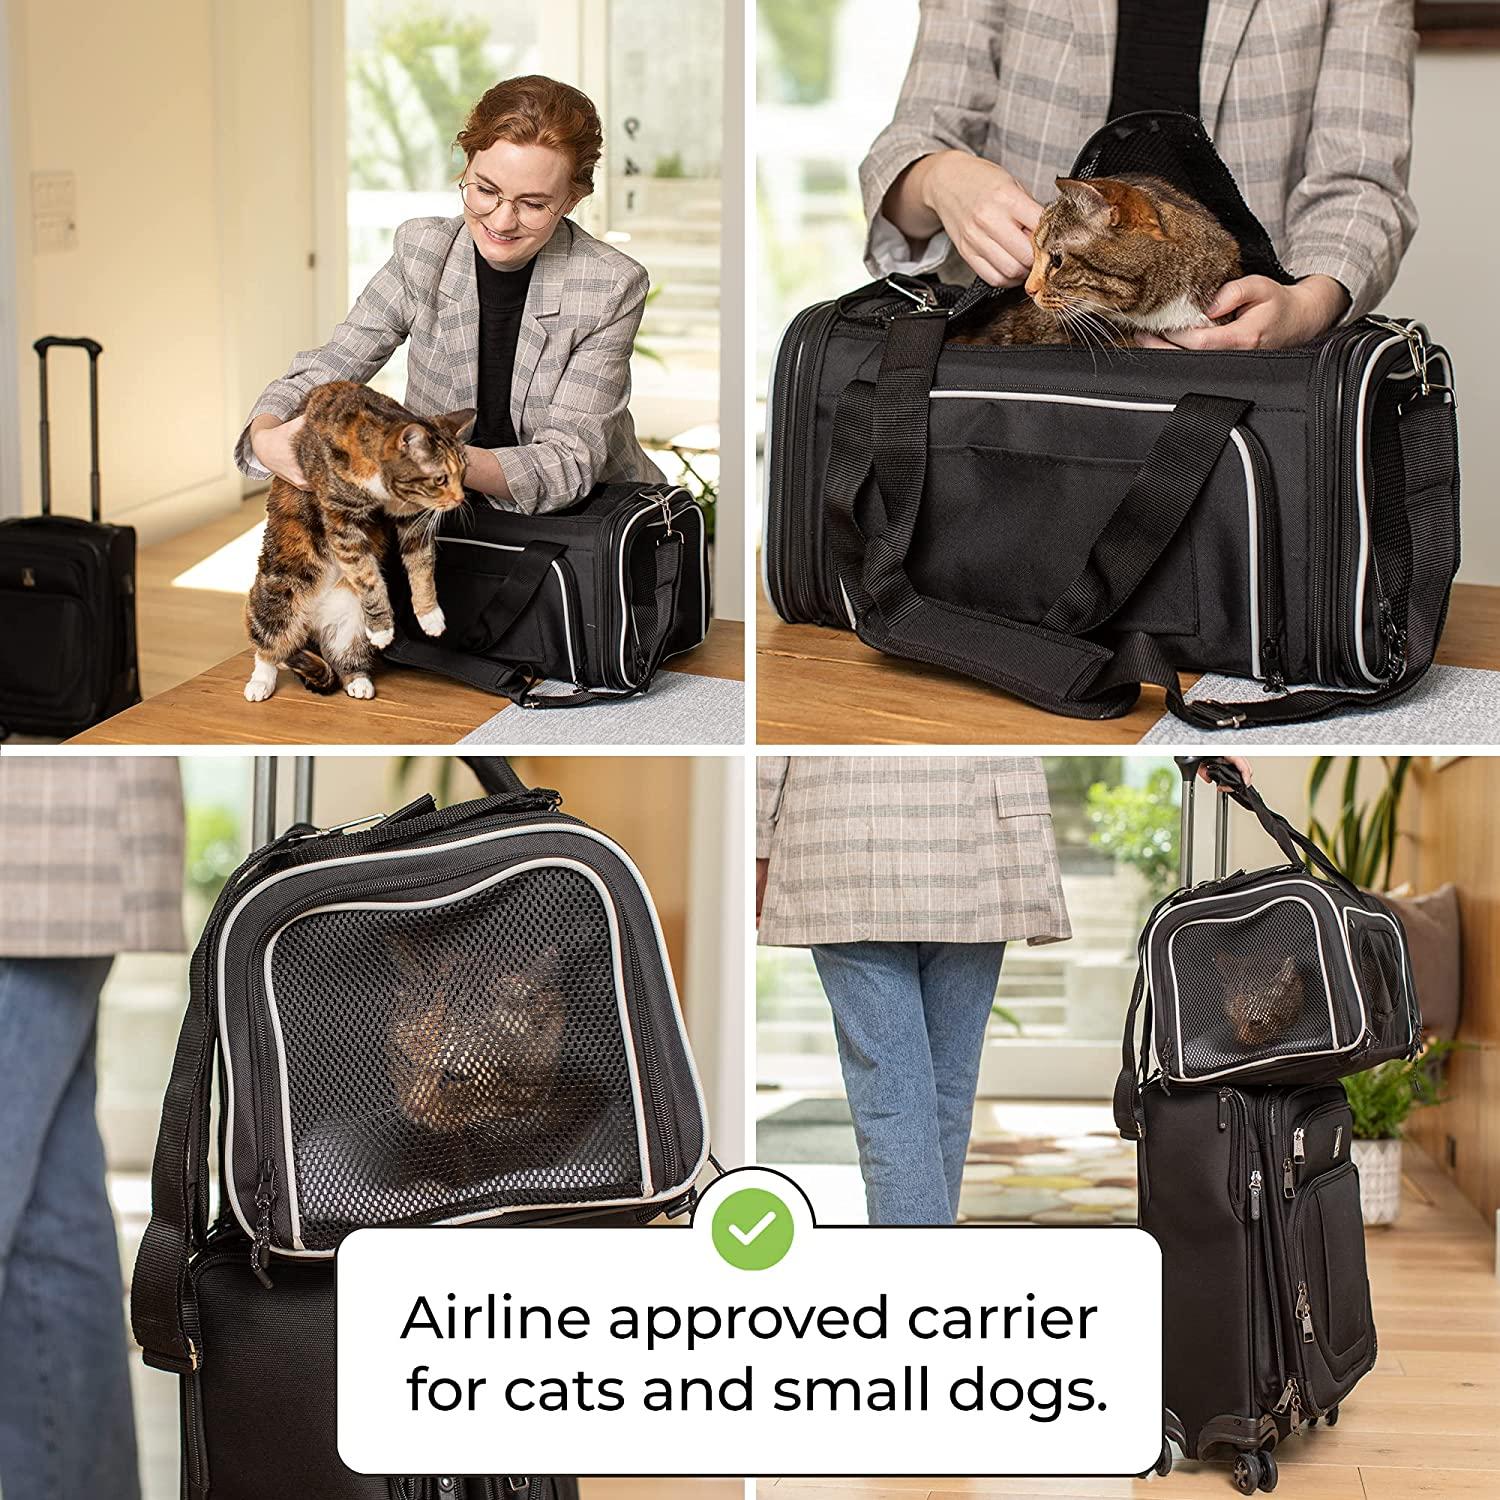 Smiling Paws Pets - TSA Airline Approved Pet Carrier for Small Dogs and  Cats - Expandable - Compact & Collapsible Travel Dog Cat Carrier - 9 Inches  Tall - Fits Under Airplane Seat (17x11x9)